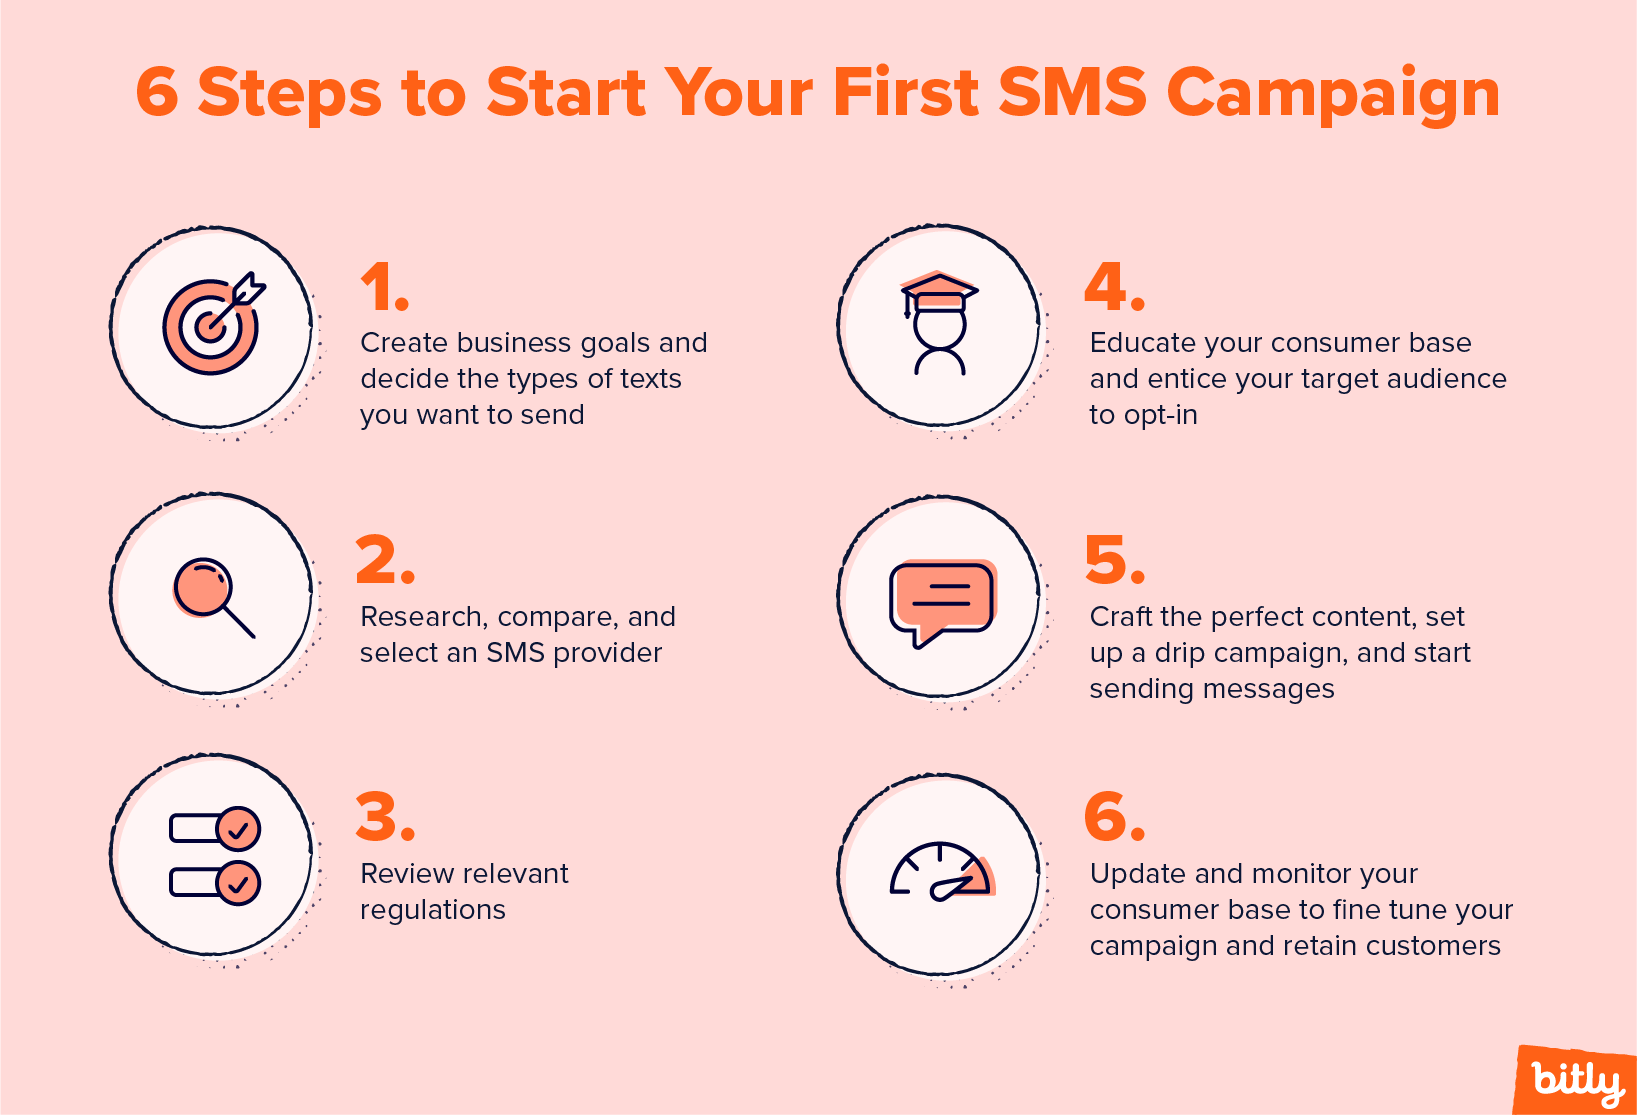 A cheat sheet outlining six steps for starting your first SMS campaign